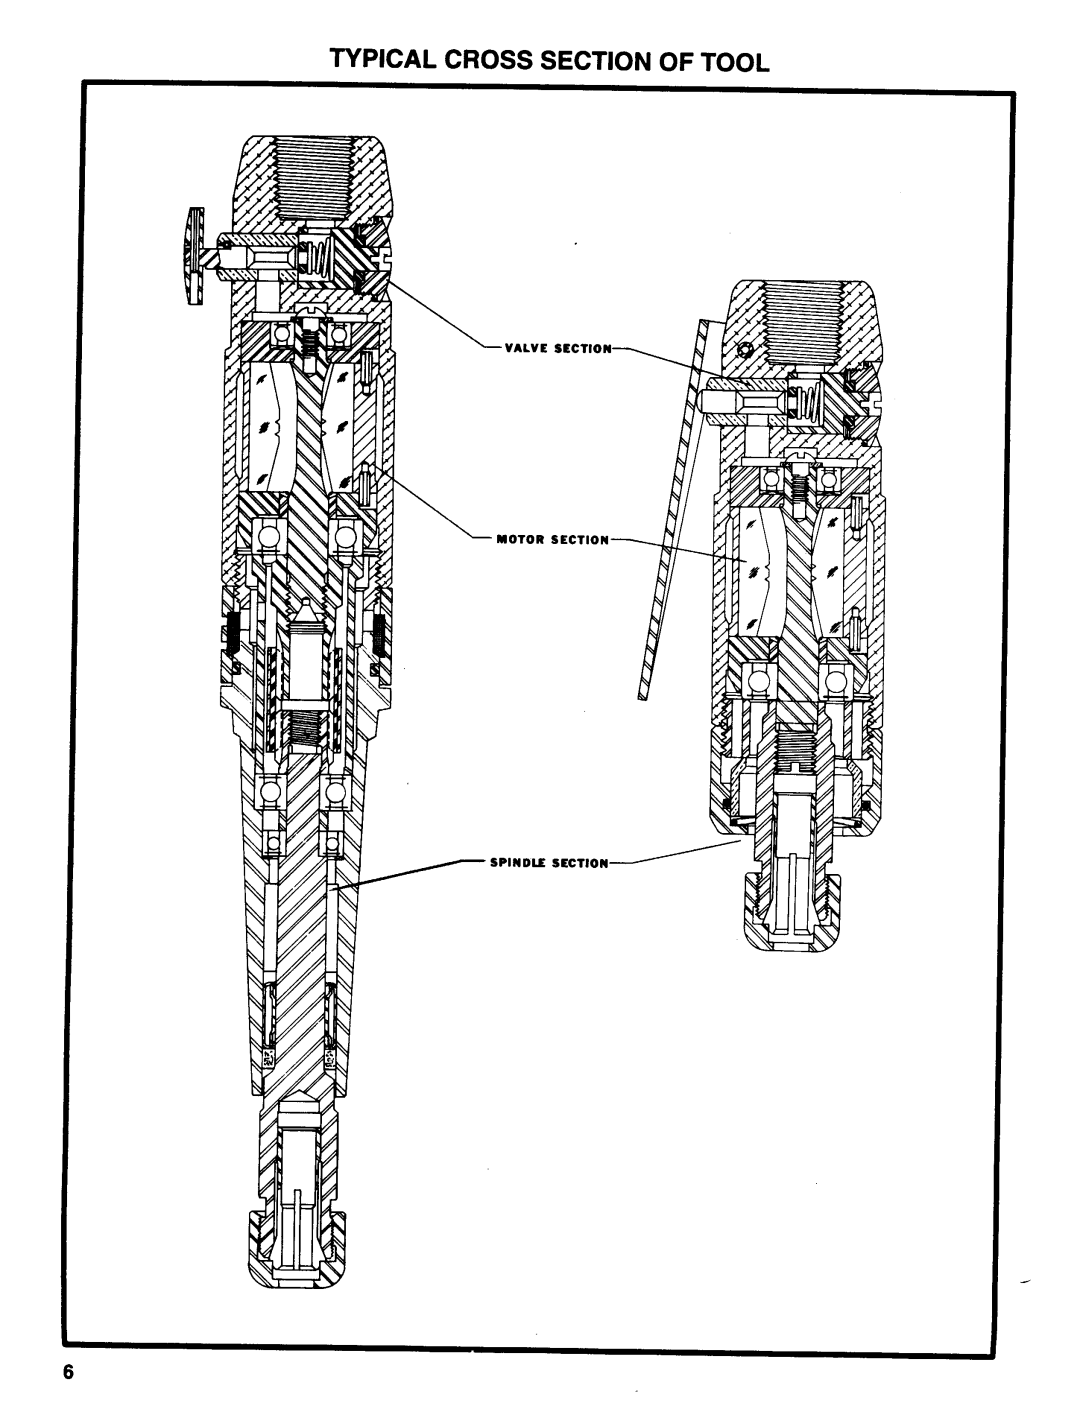 Ingersoll-Rand 8478-A1, 8475-A-( ), 8476-A1, 8475-A1, 8477-A1 manual Typical Cross Section Of Tool, Valve, Spindle 